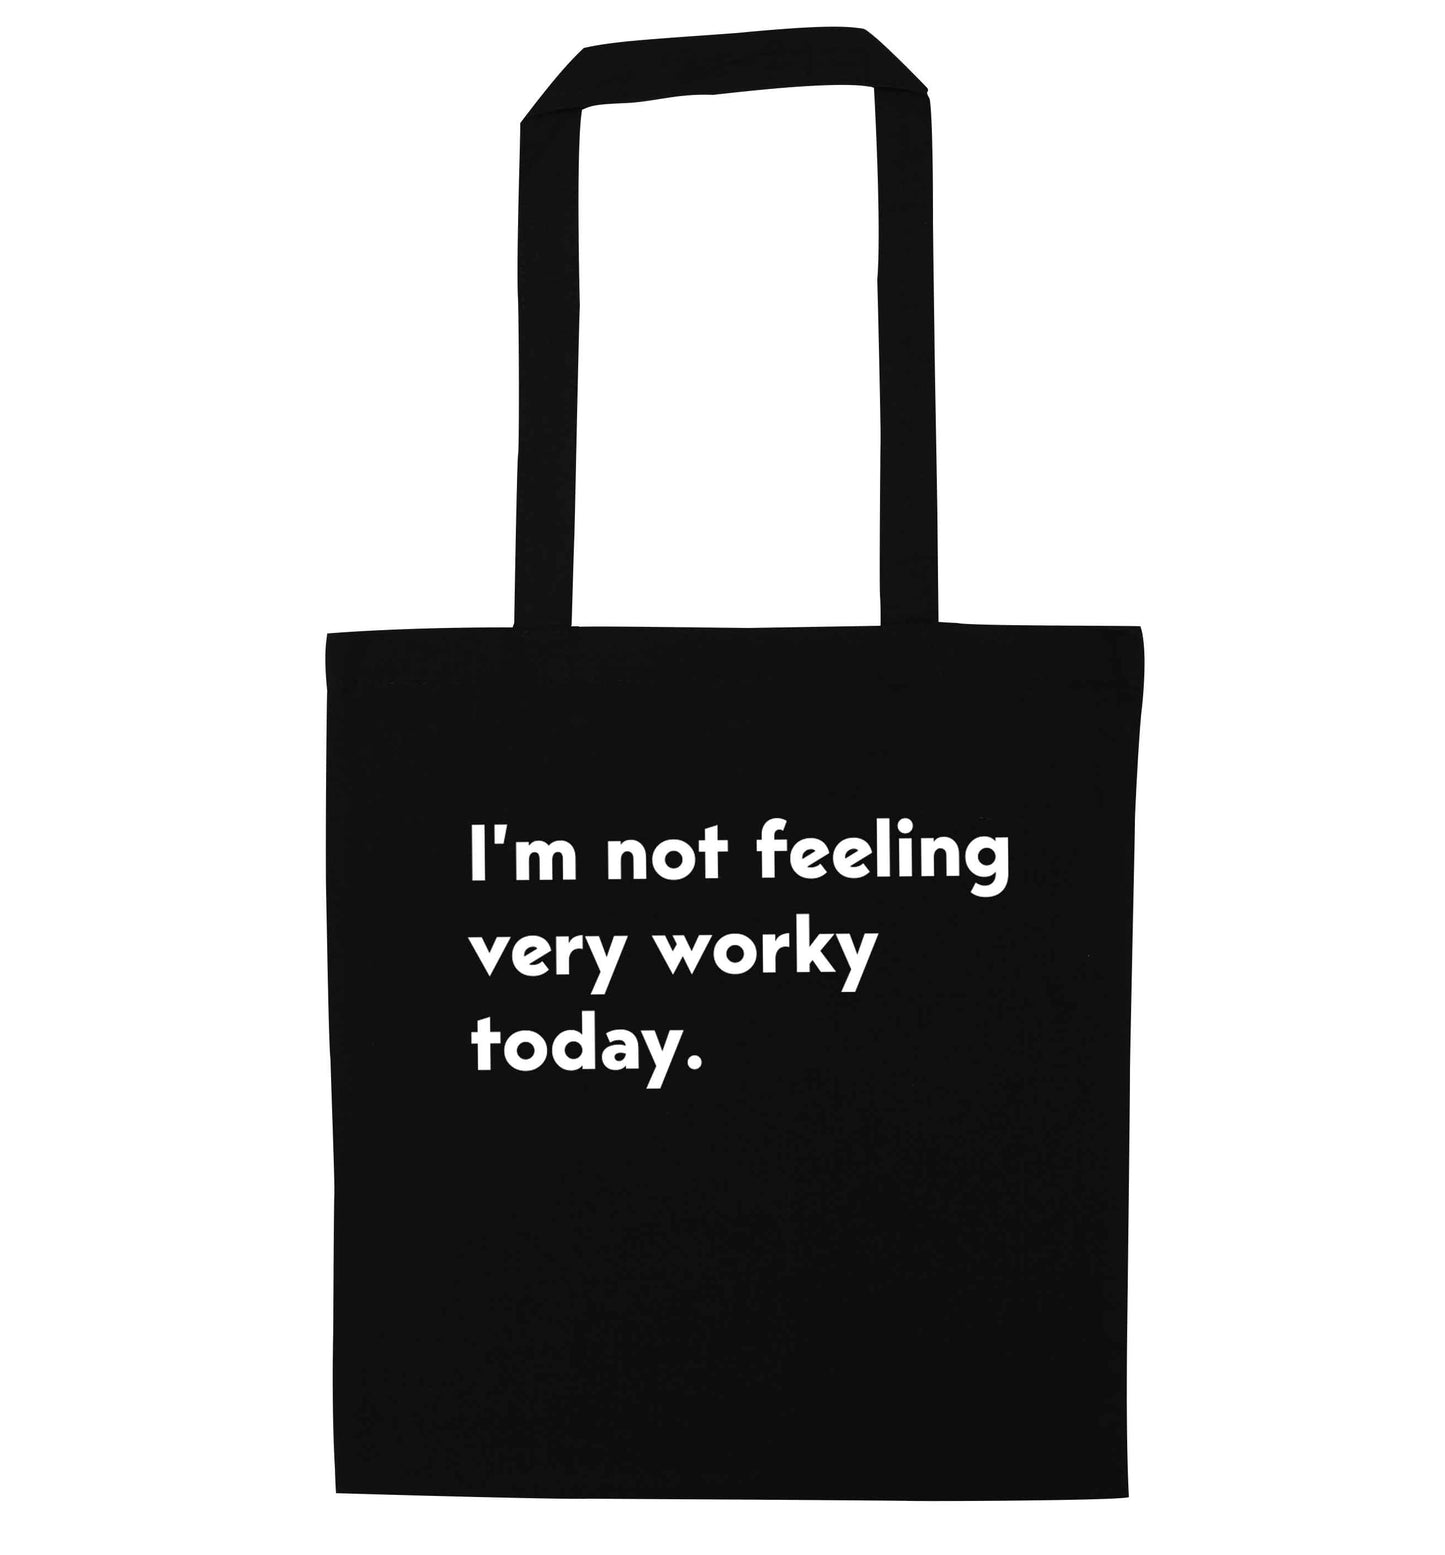 I'm not feeling very worky today black tote bag